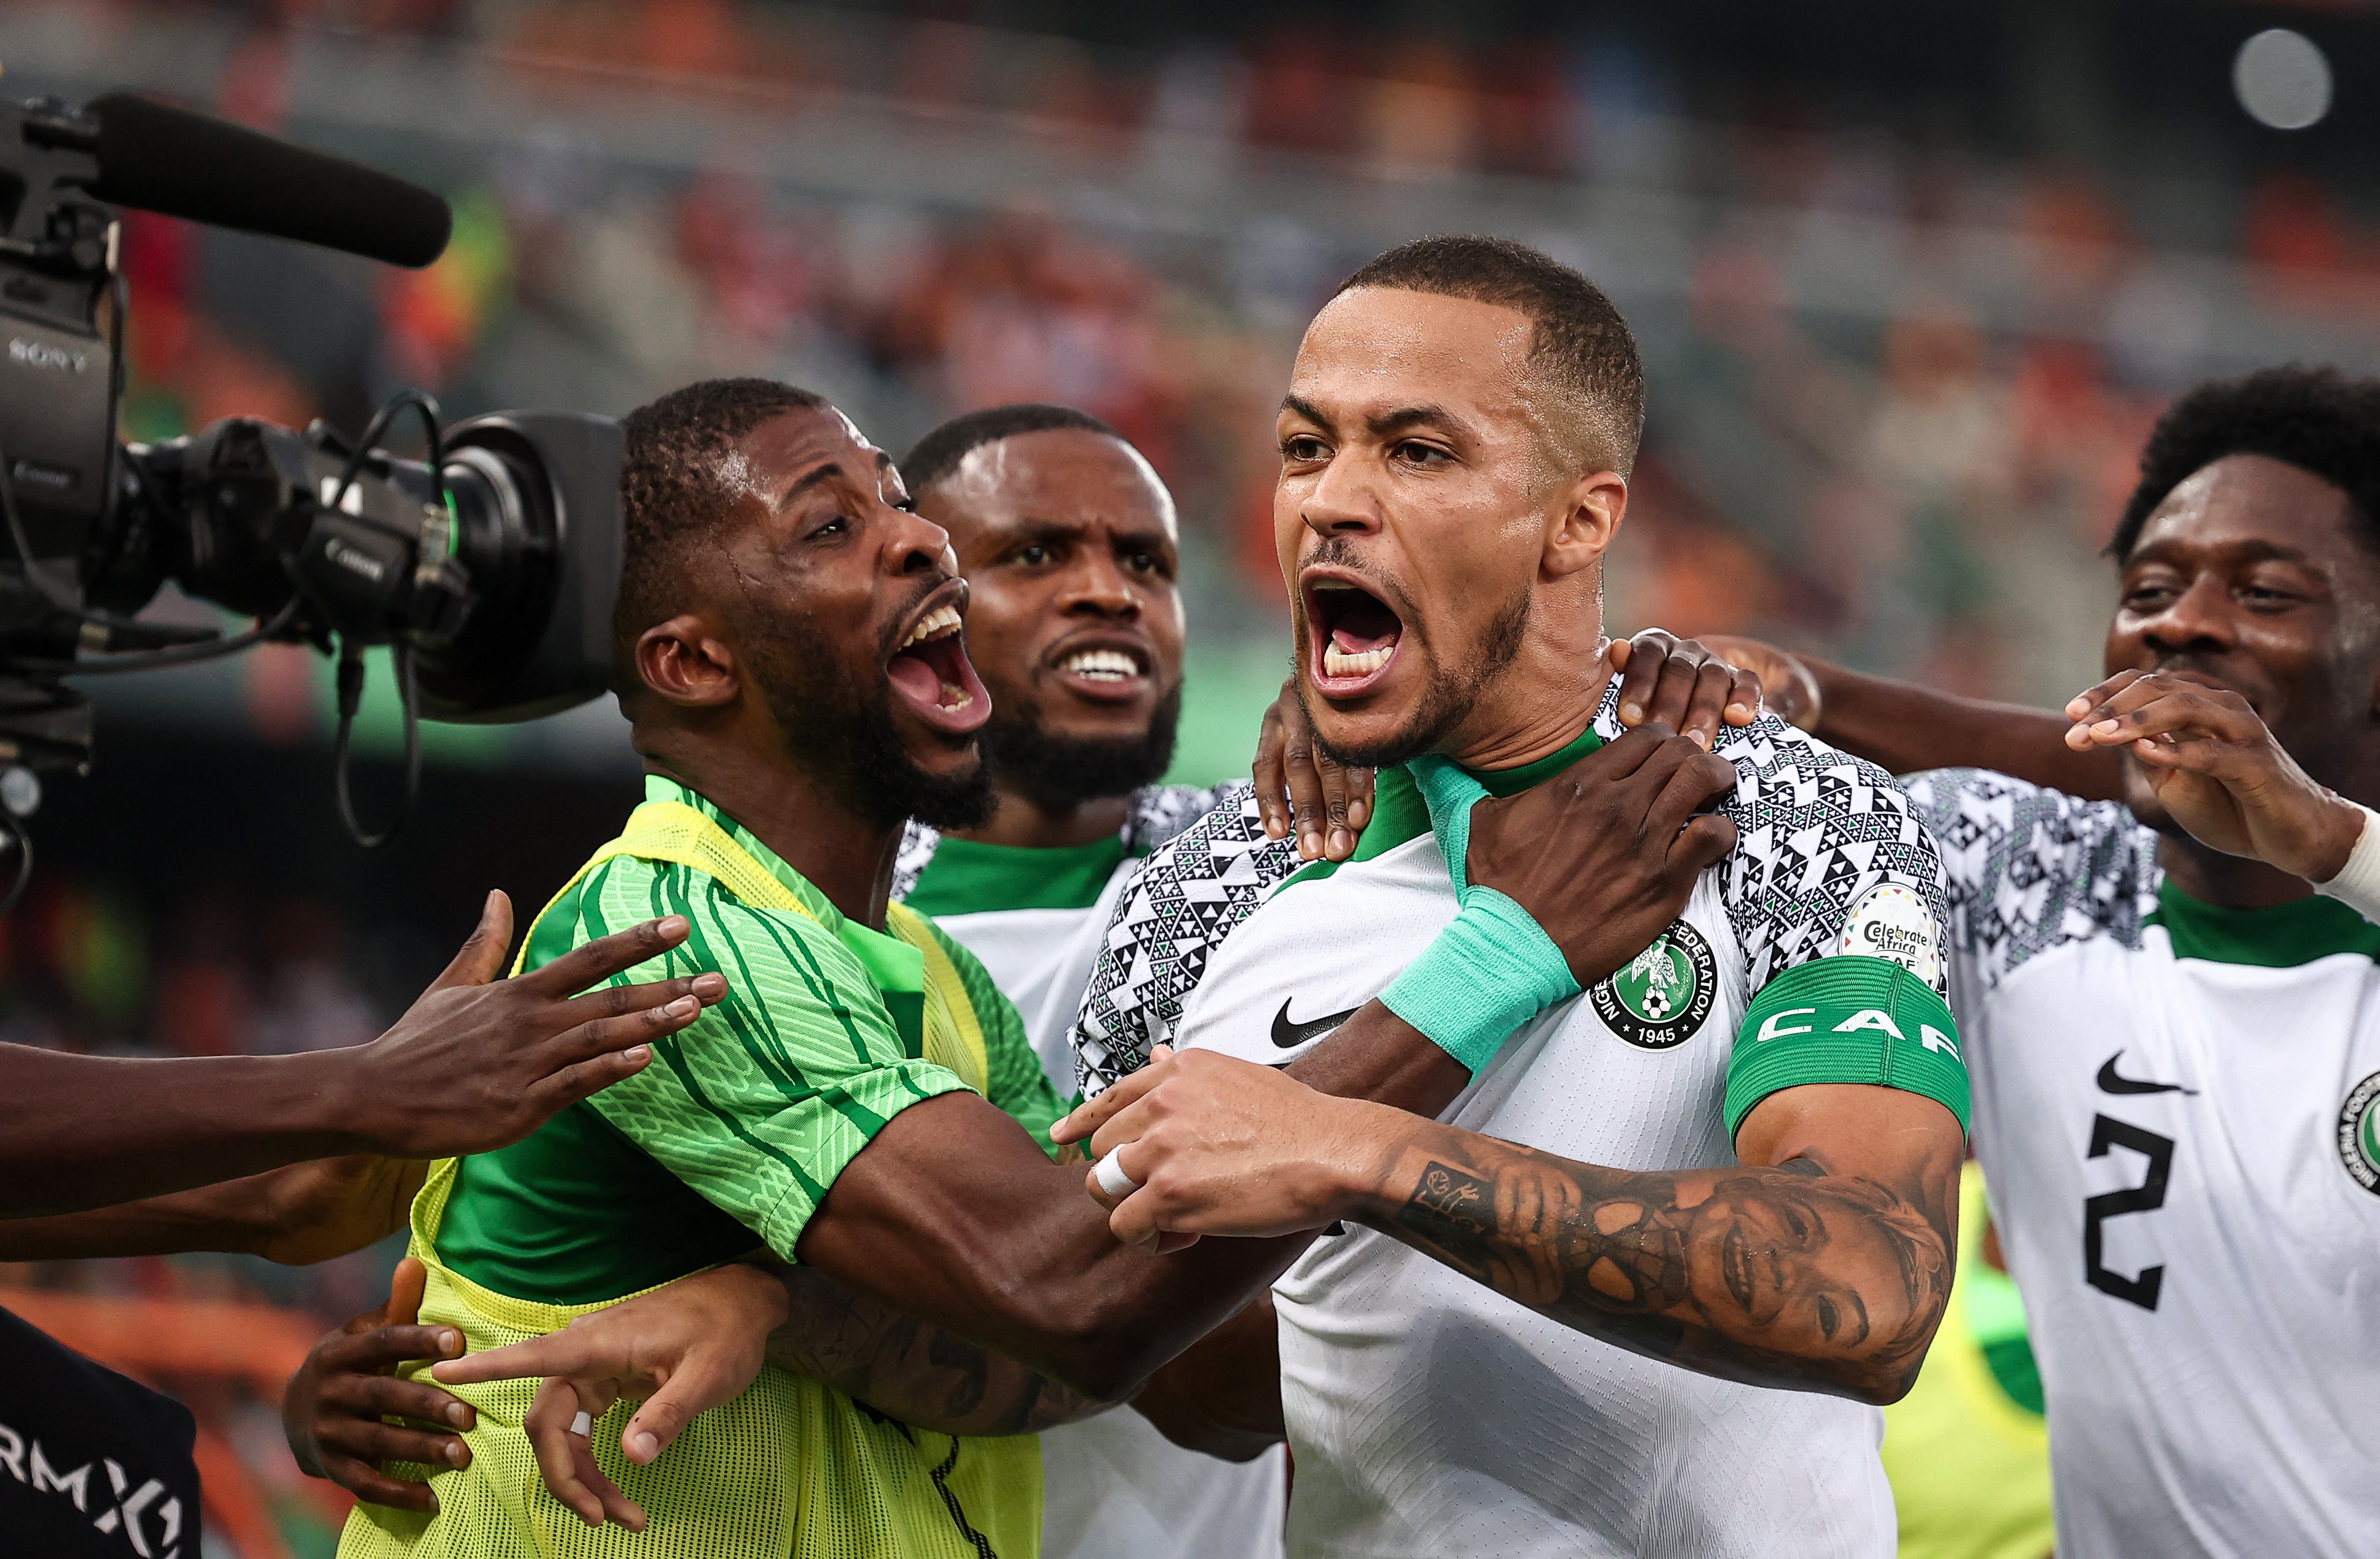 Nigeria earned a much-needed win to move up to second place in Afcon Group A